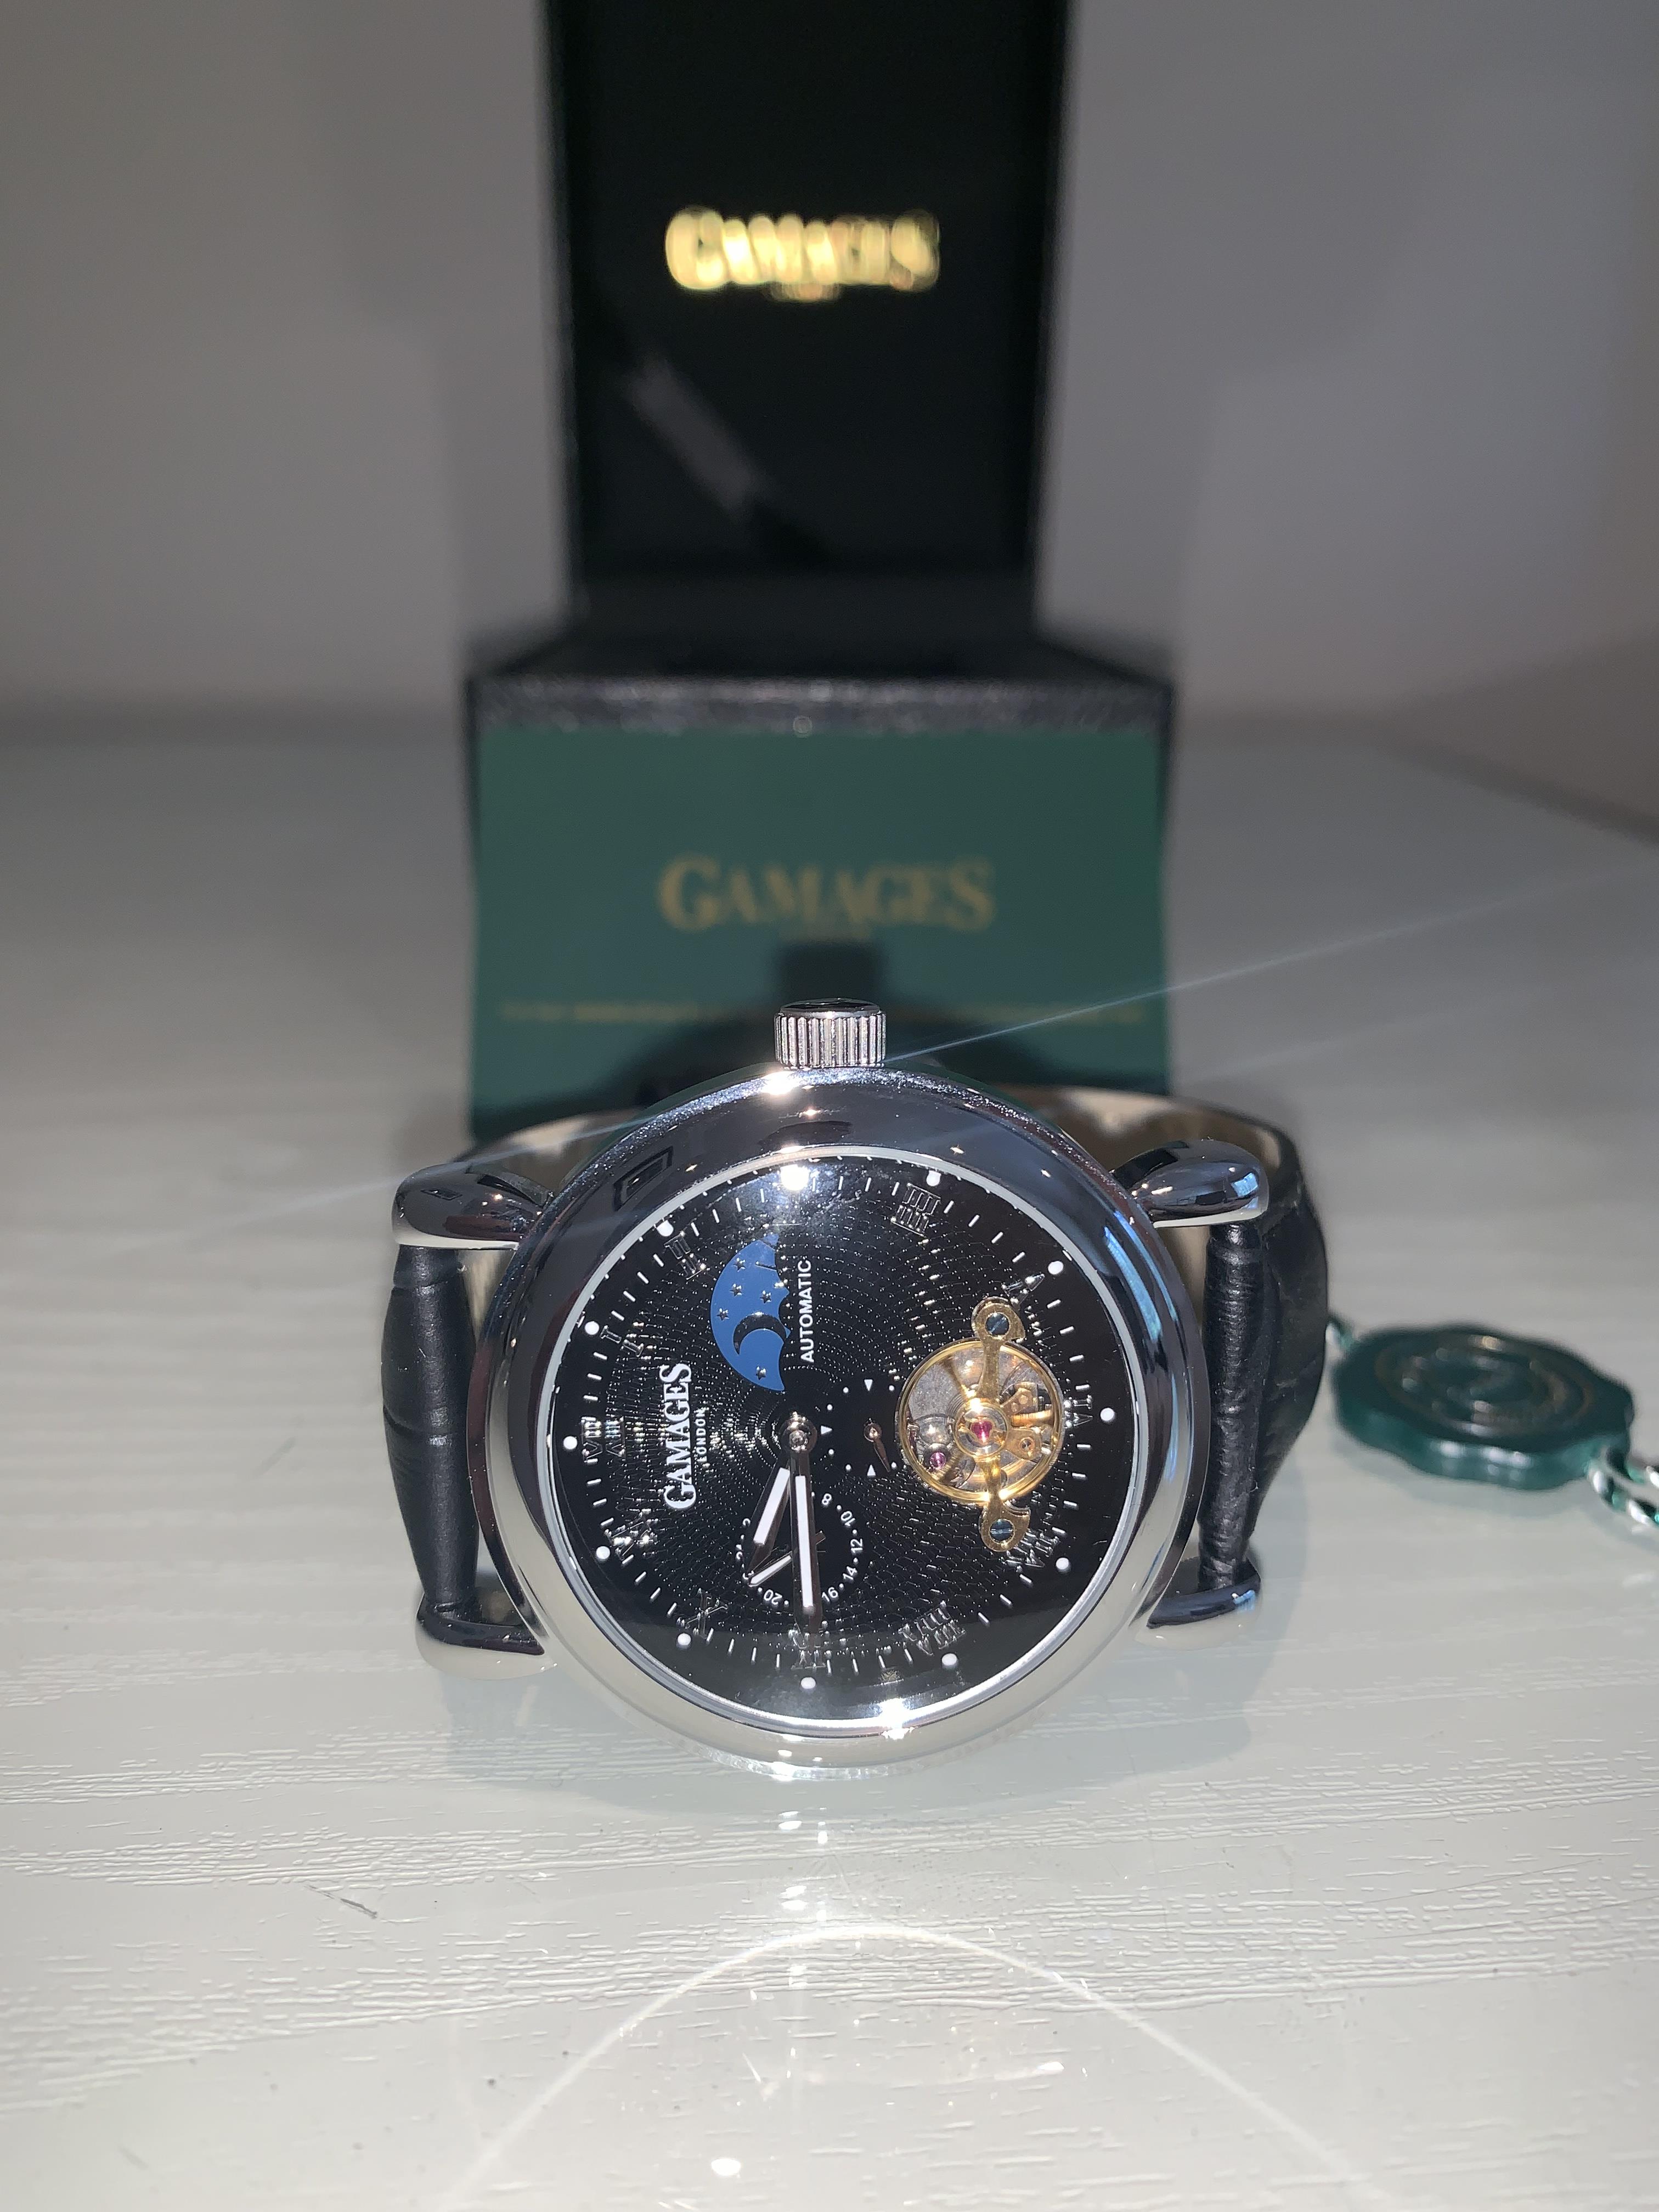 Limited Edition Hand Assembled GAMAGES Moon Phase Automatic Steel – 5 Year Warranty & Free Delivery - Image 3 of 6